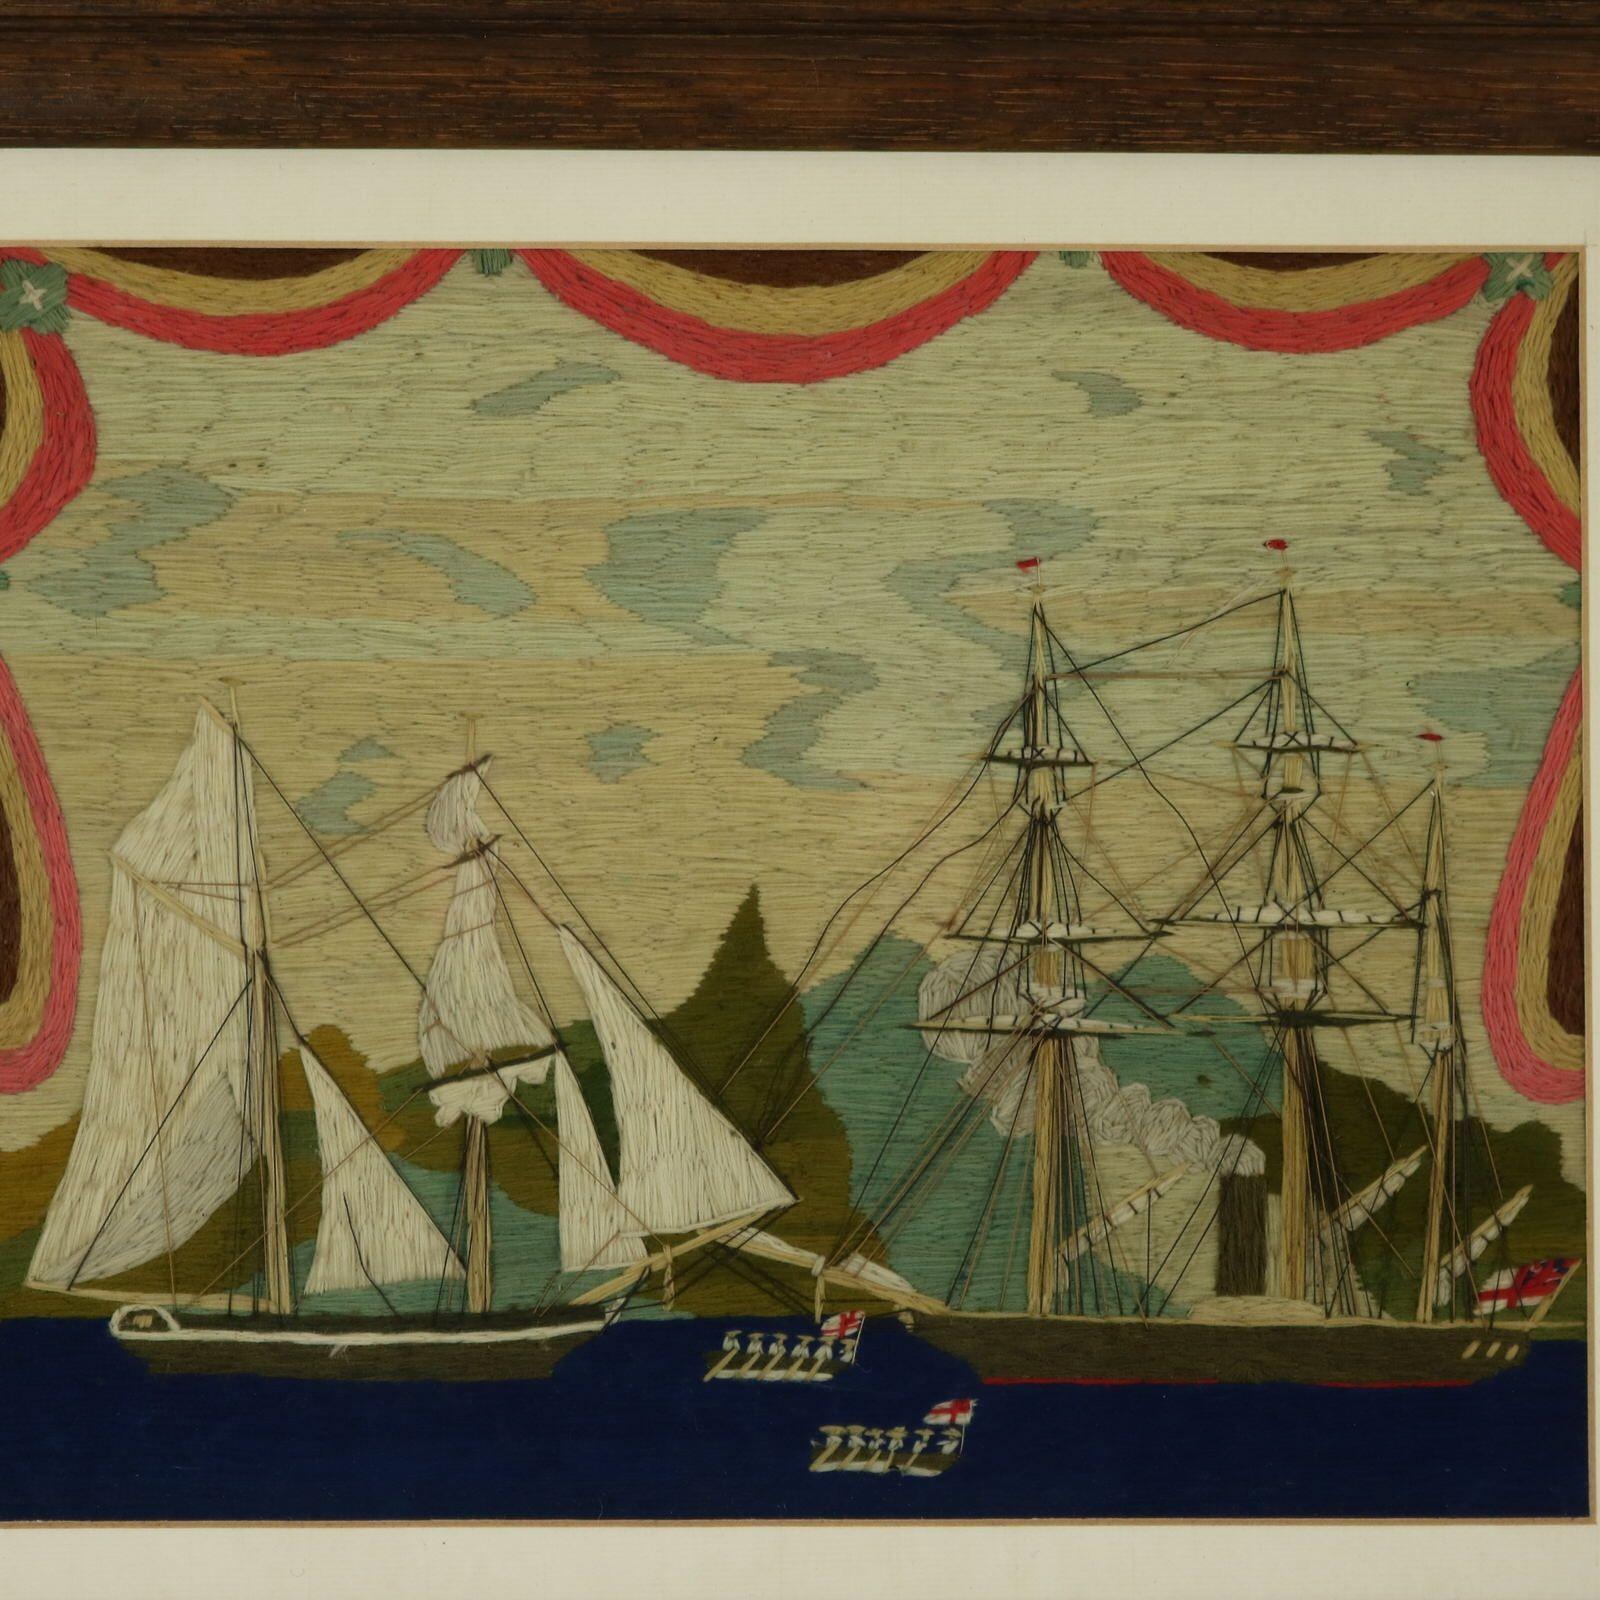 Antique Sailor's Woolwork Embroidery Picture of two sailing ships and sailors in rowing boats. One of the ships is steam powered, with smoke coming out of the chimney/smokestack. Drapes to the top and sides of the piece. The embroidery is worked in